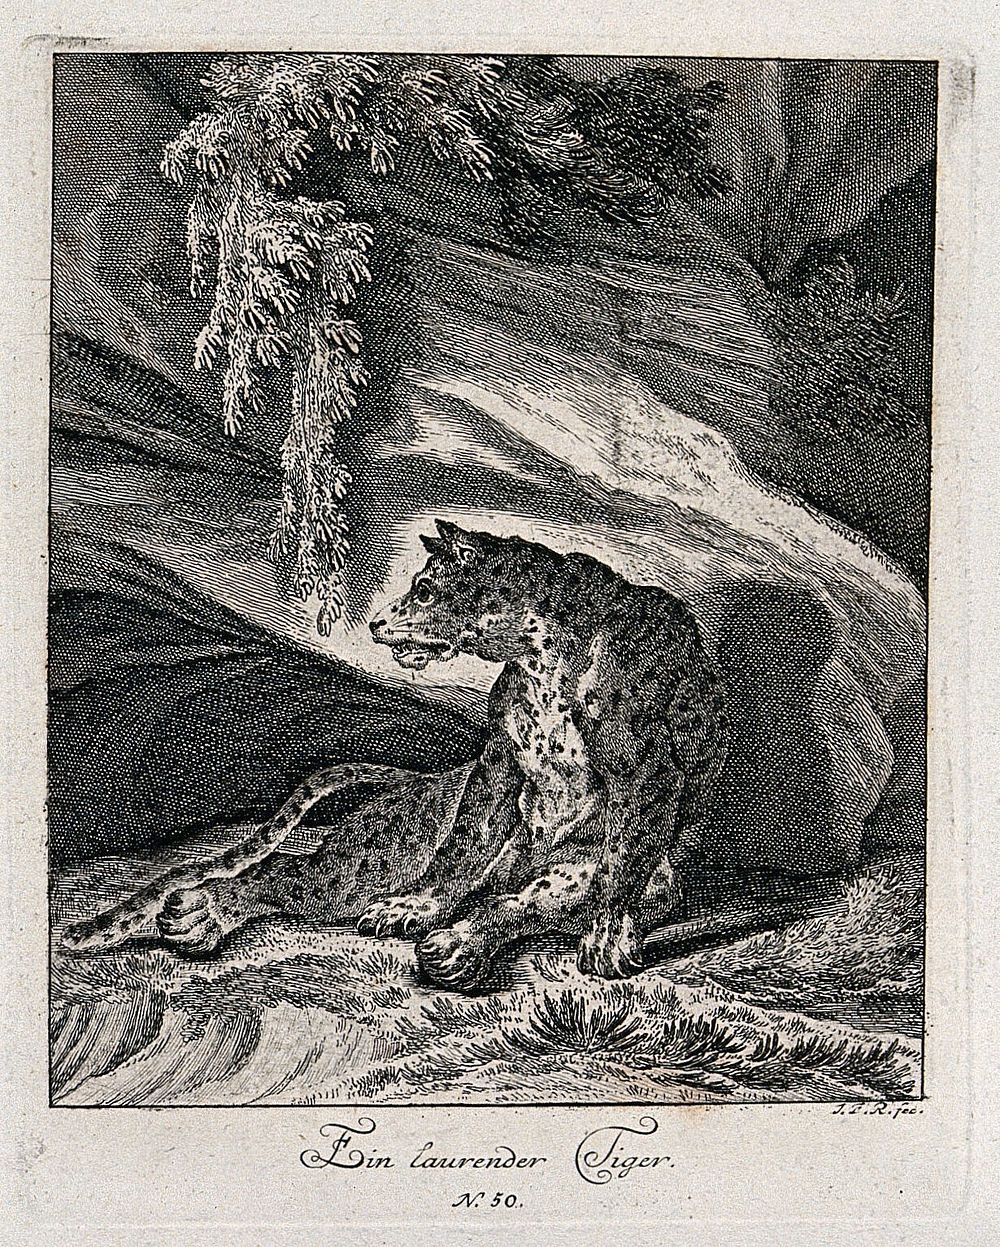 A tiger lying in wait for prey in a rocky landscape. Etching by J. E. Ridinger.